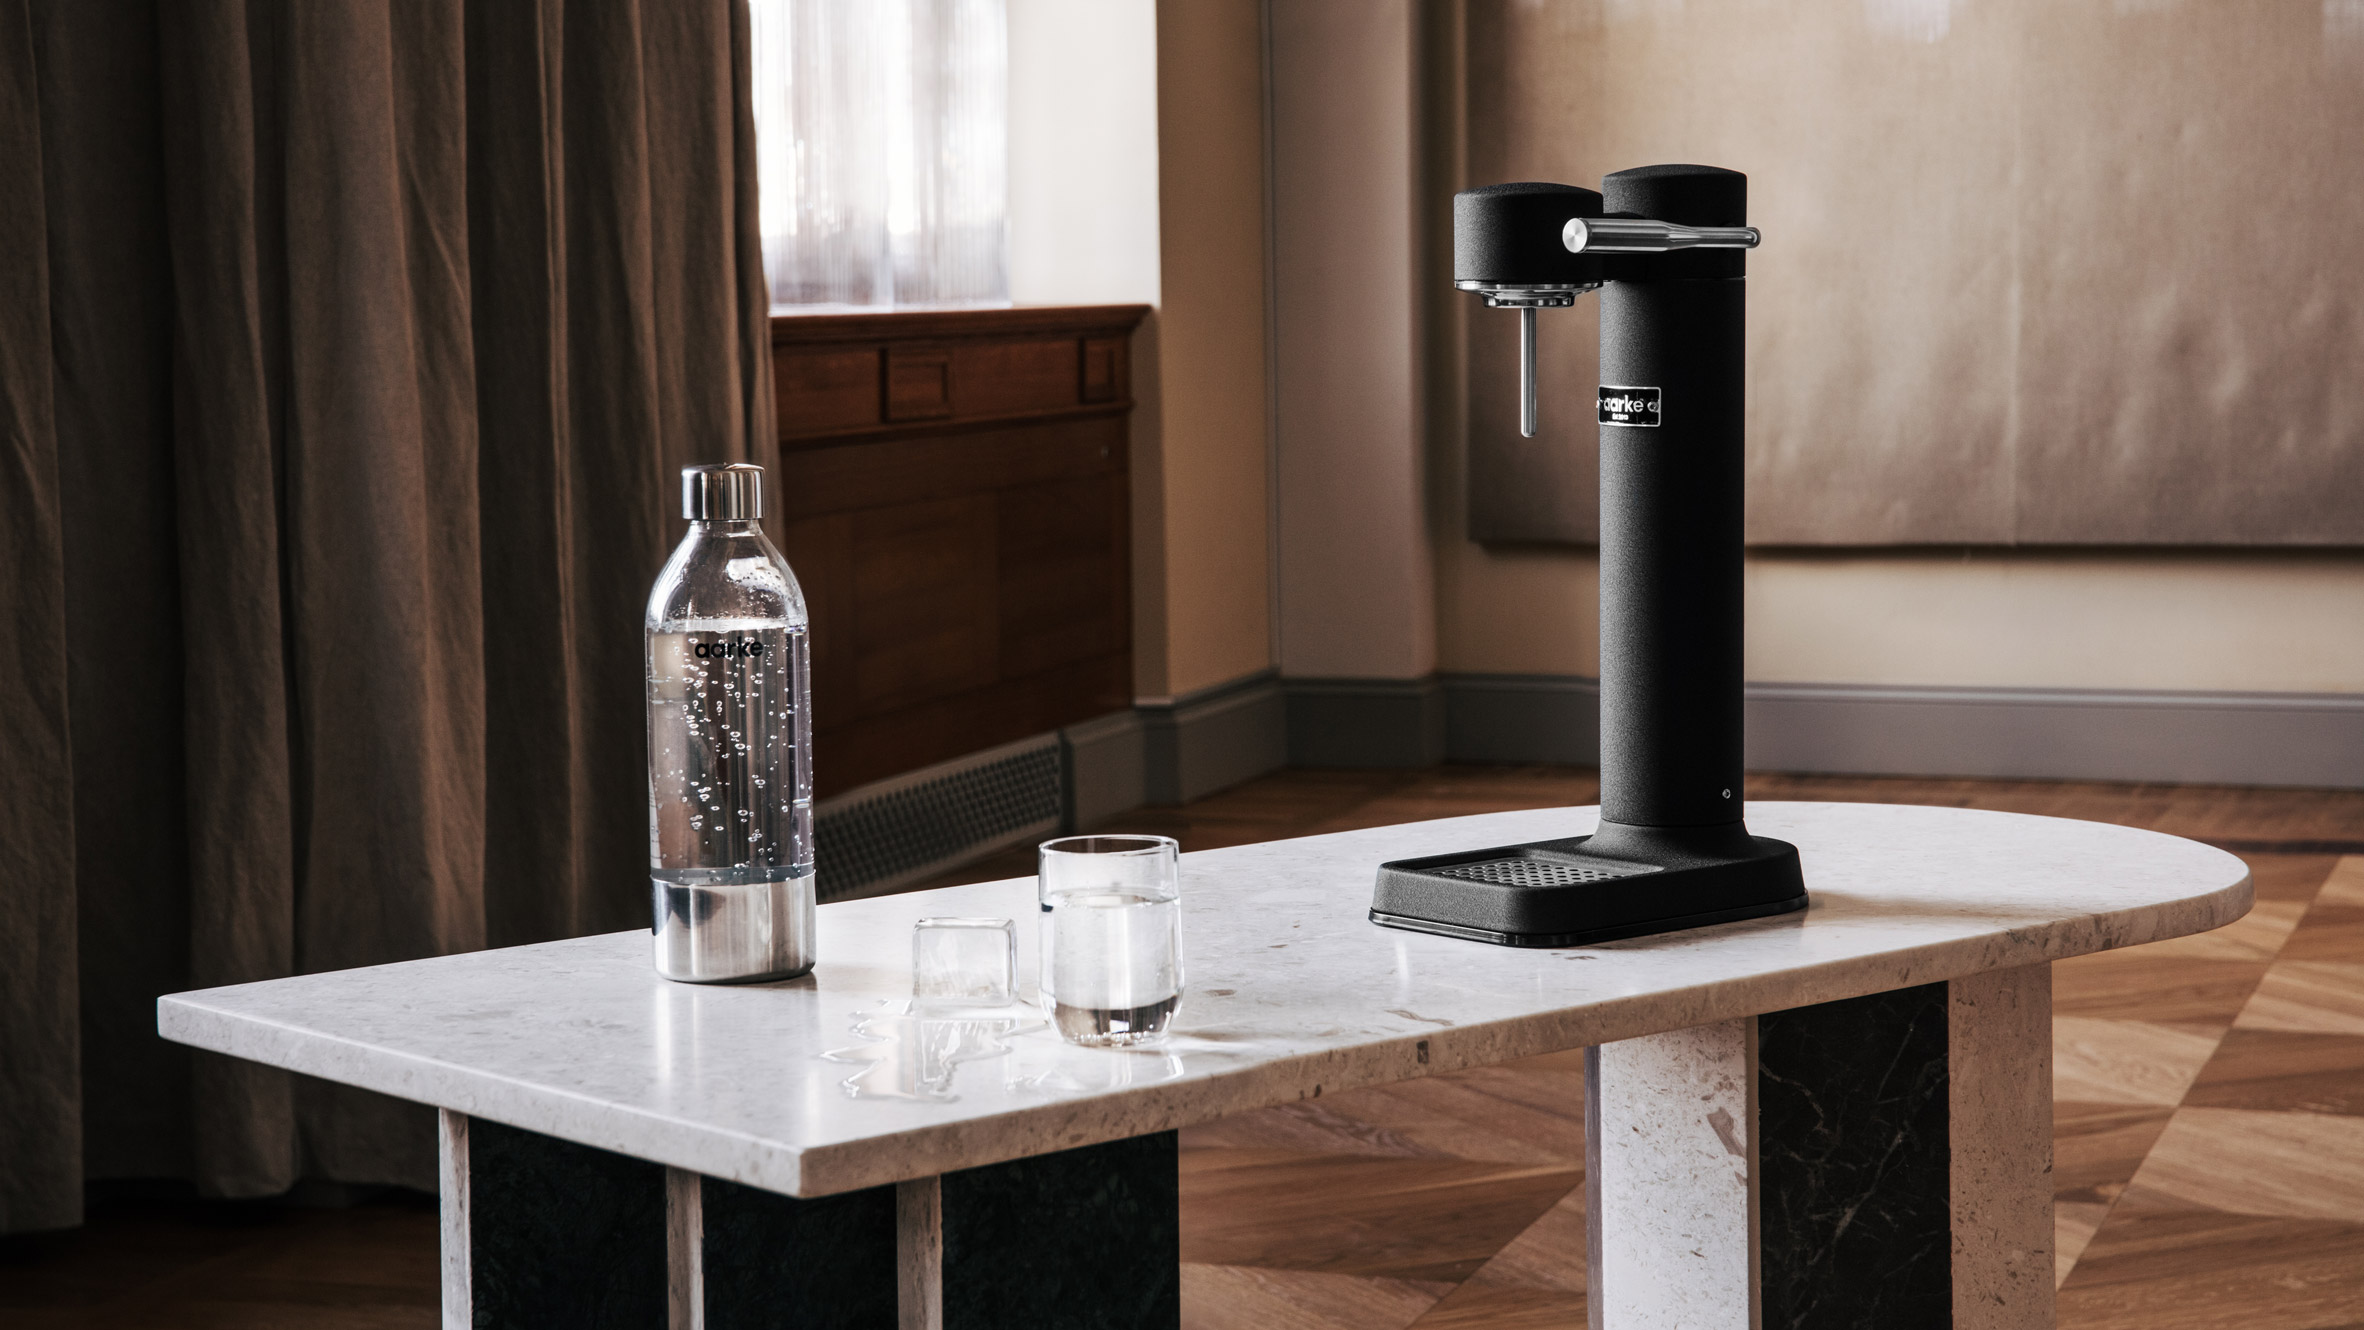 Aarke's Carbonator 3 is a minimalist soda maker for the home